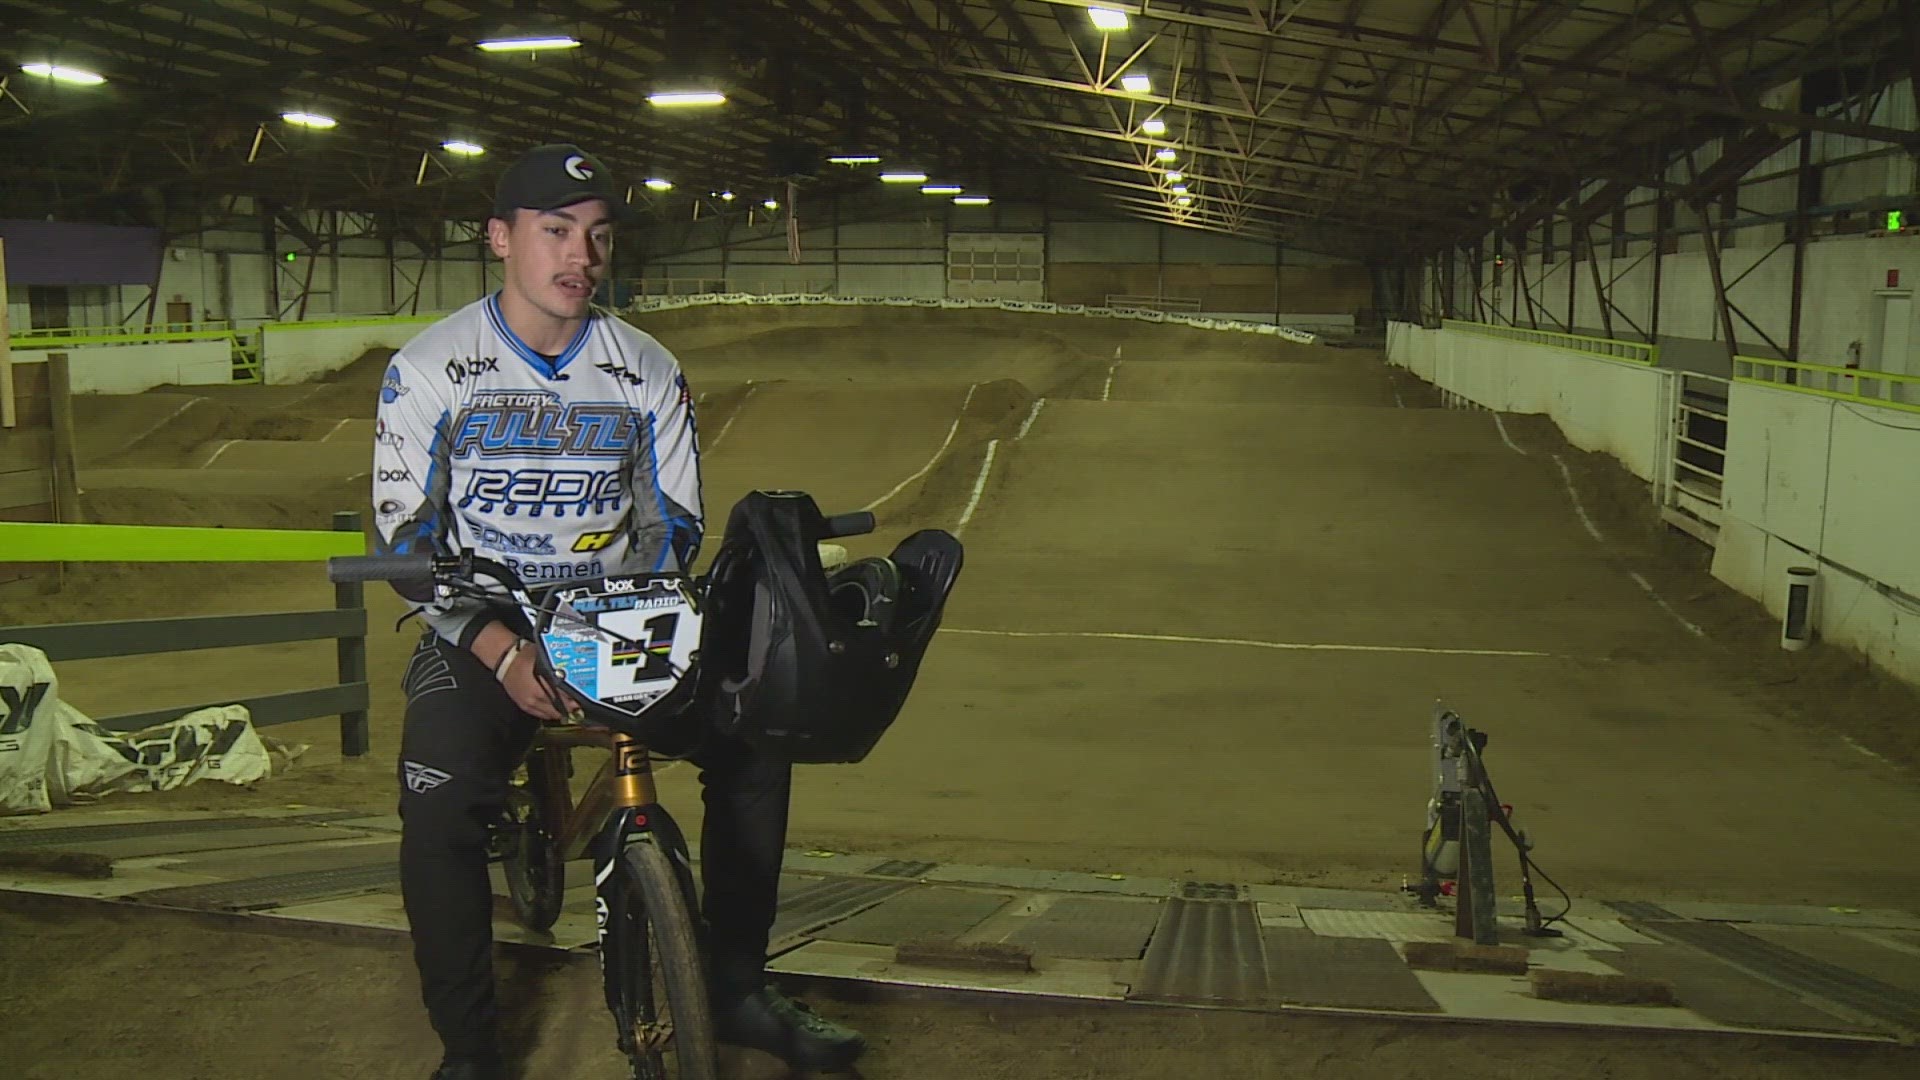 Sean Day's rise to the top of the BMX world was made tougher by a lack of facilities in the Pacific Northwest. He's back home thanks to Peninsula Indoor BMX.